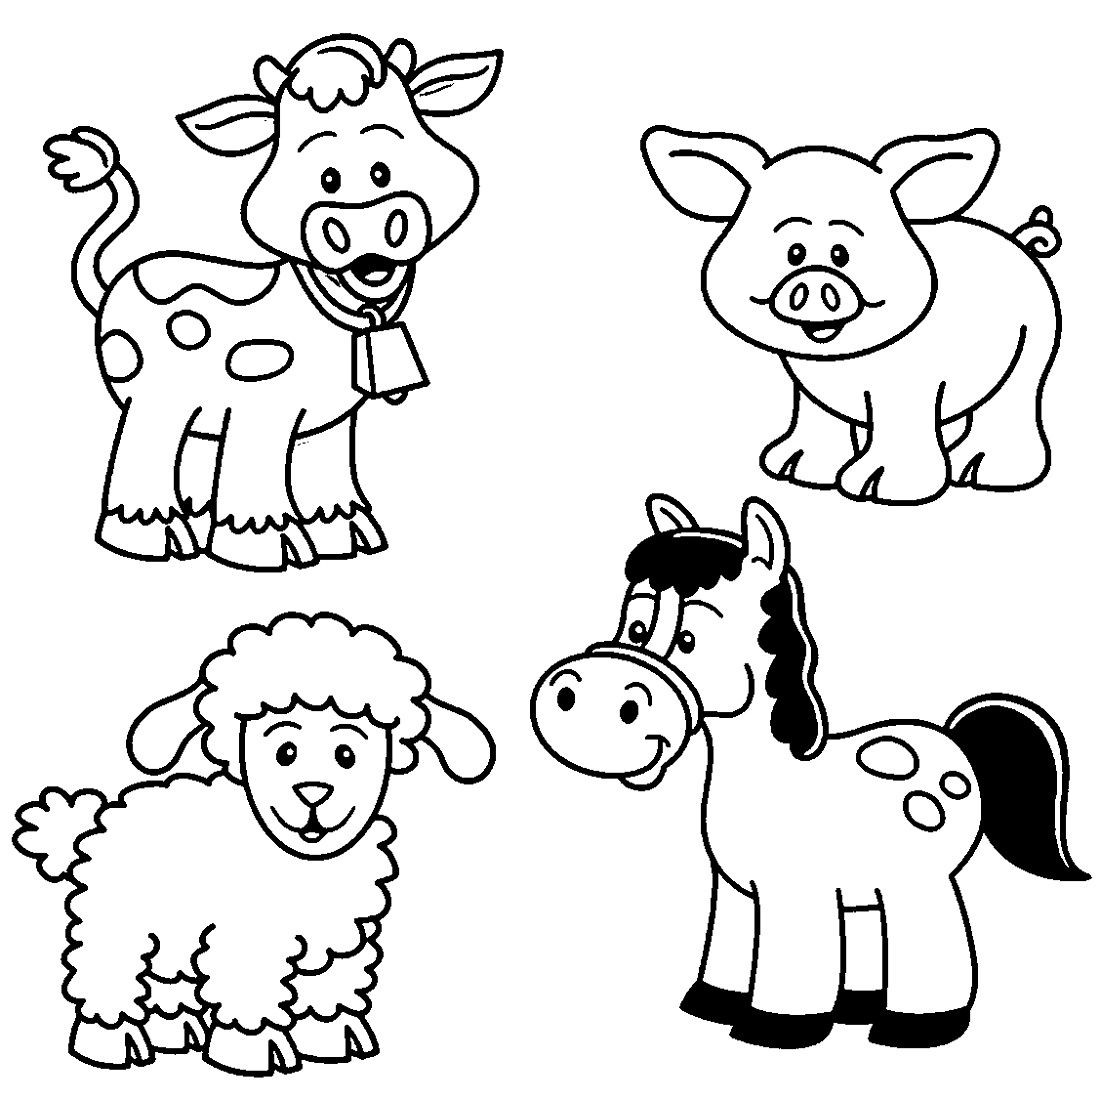 Baby Farm Animals Coloring Pages
 Printable Animal Coloring